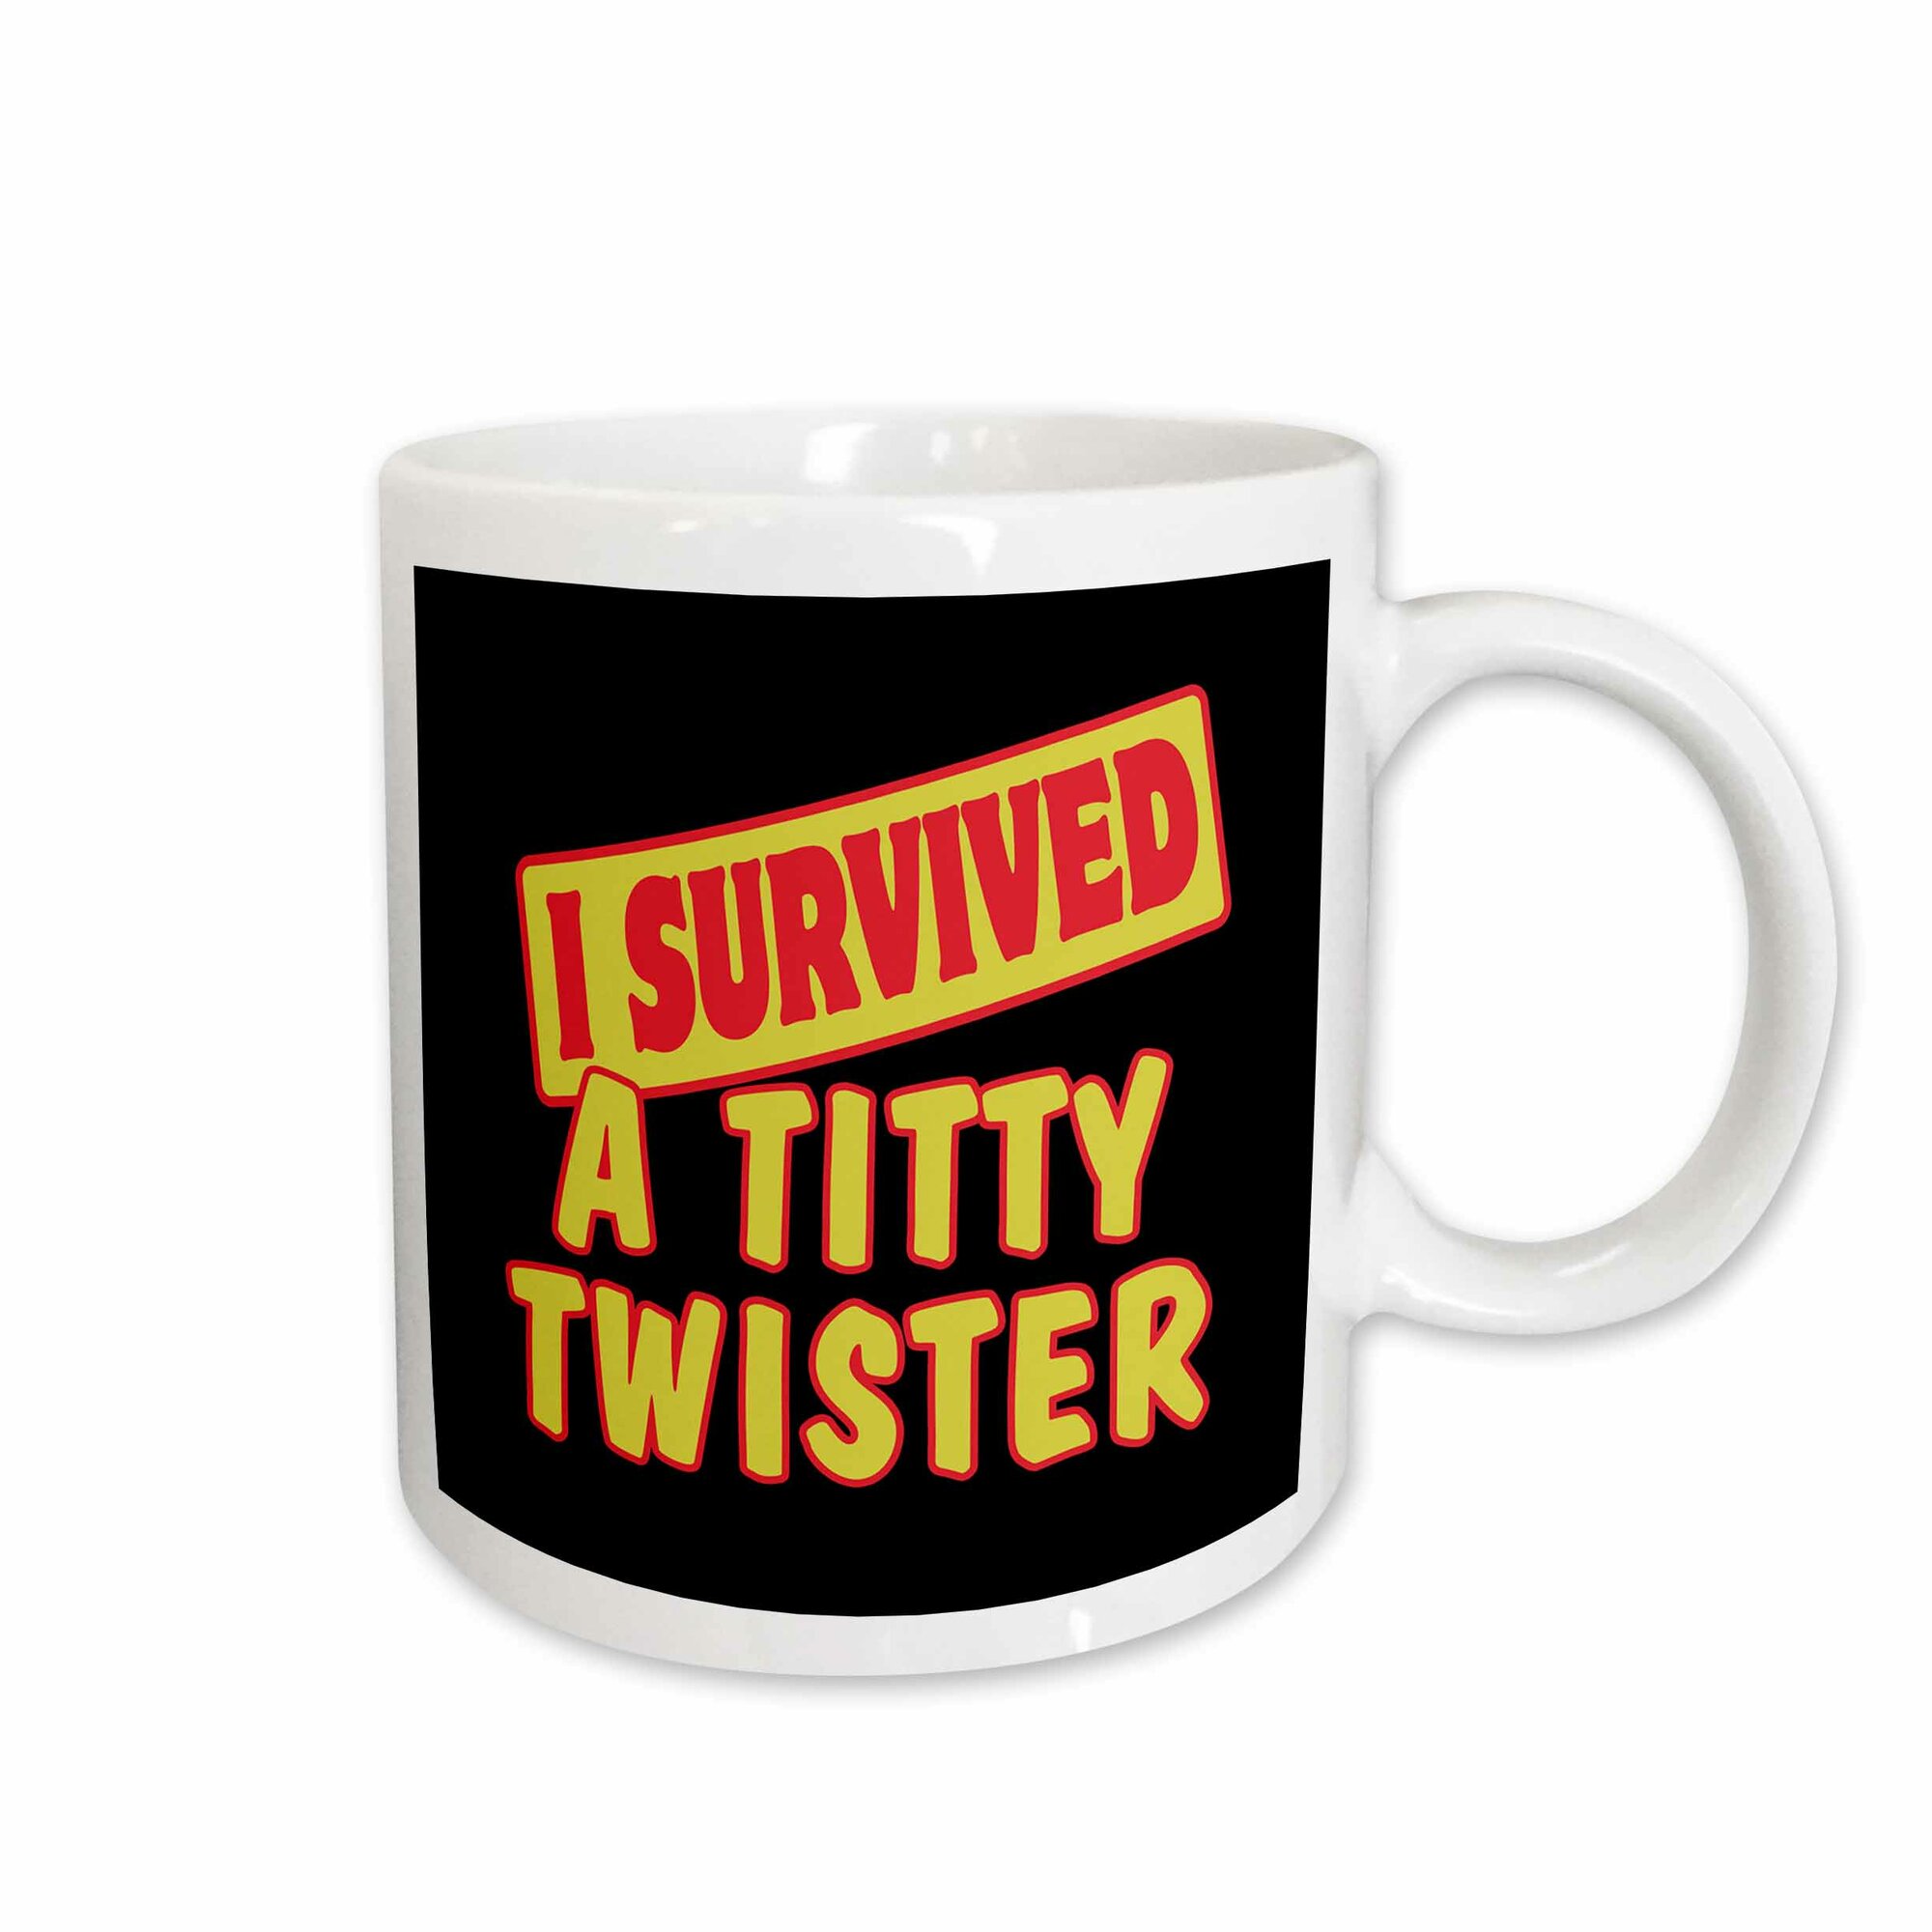 I Survived A Titty Twister Survival Pride And Humor Design Coffee Mug